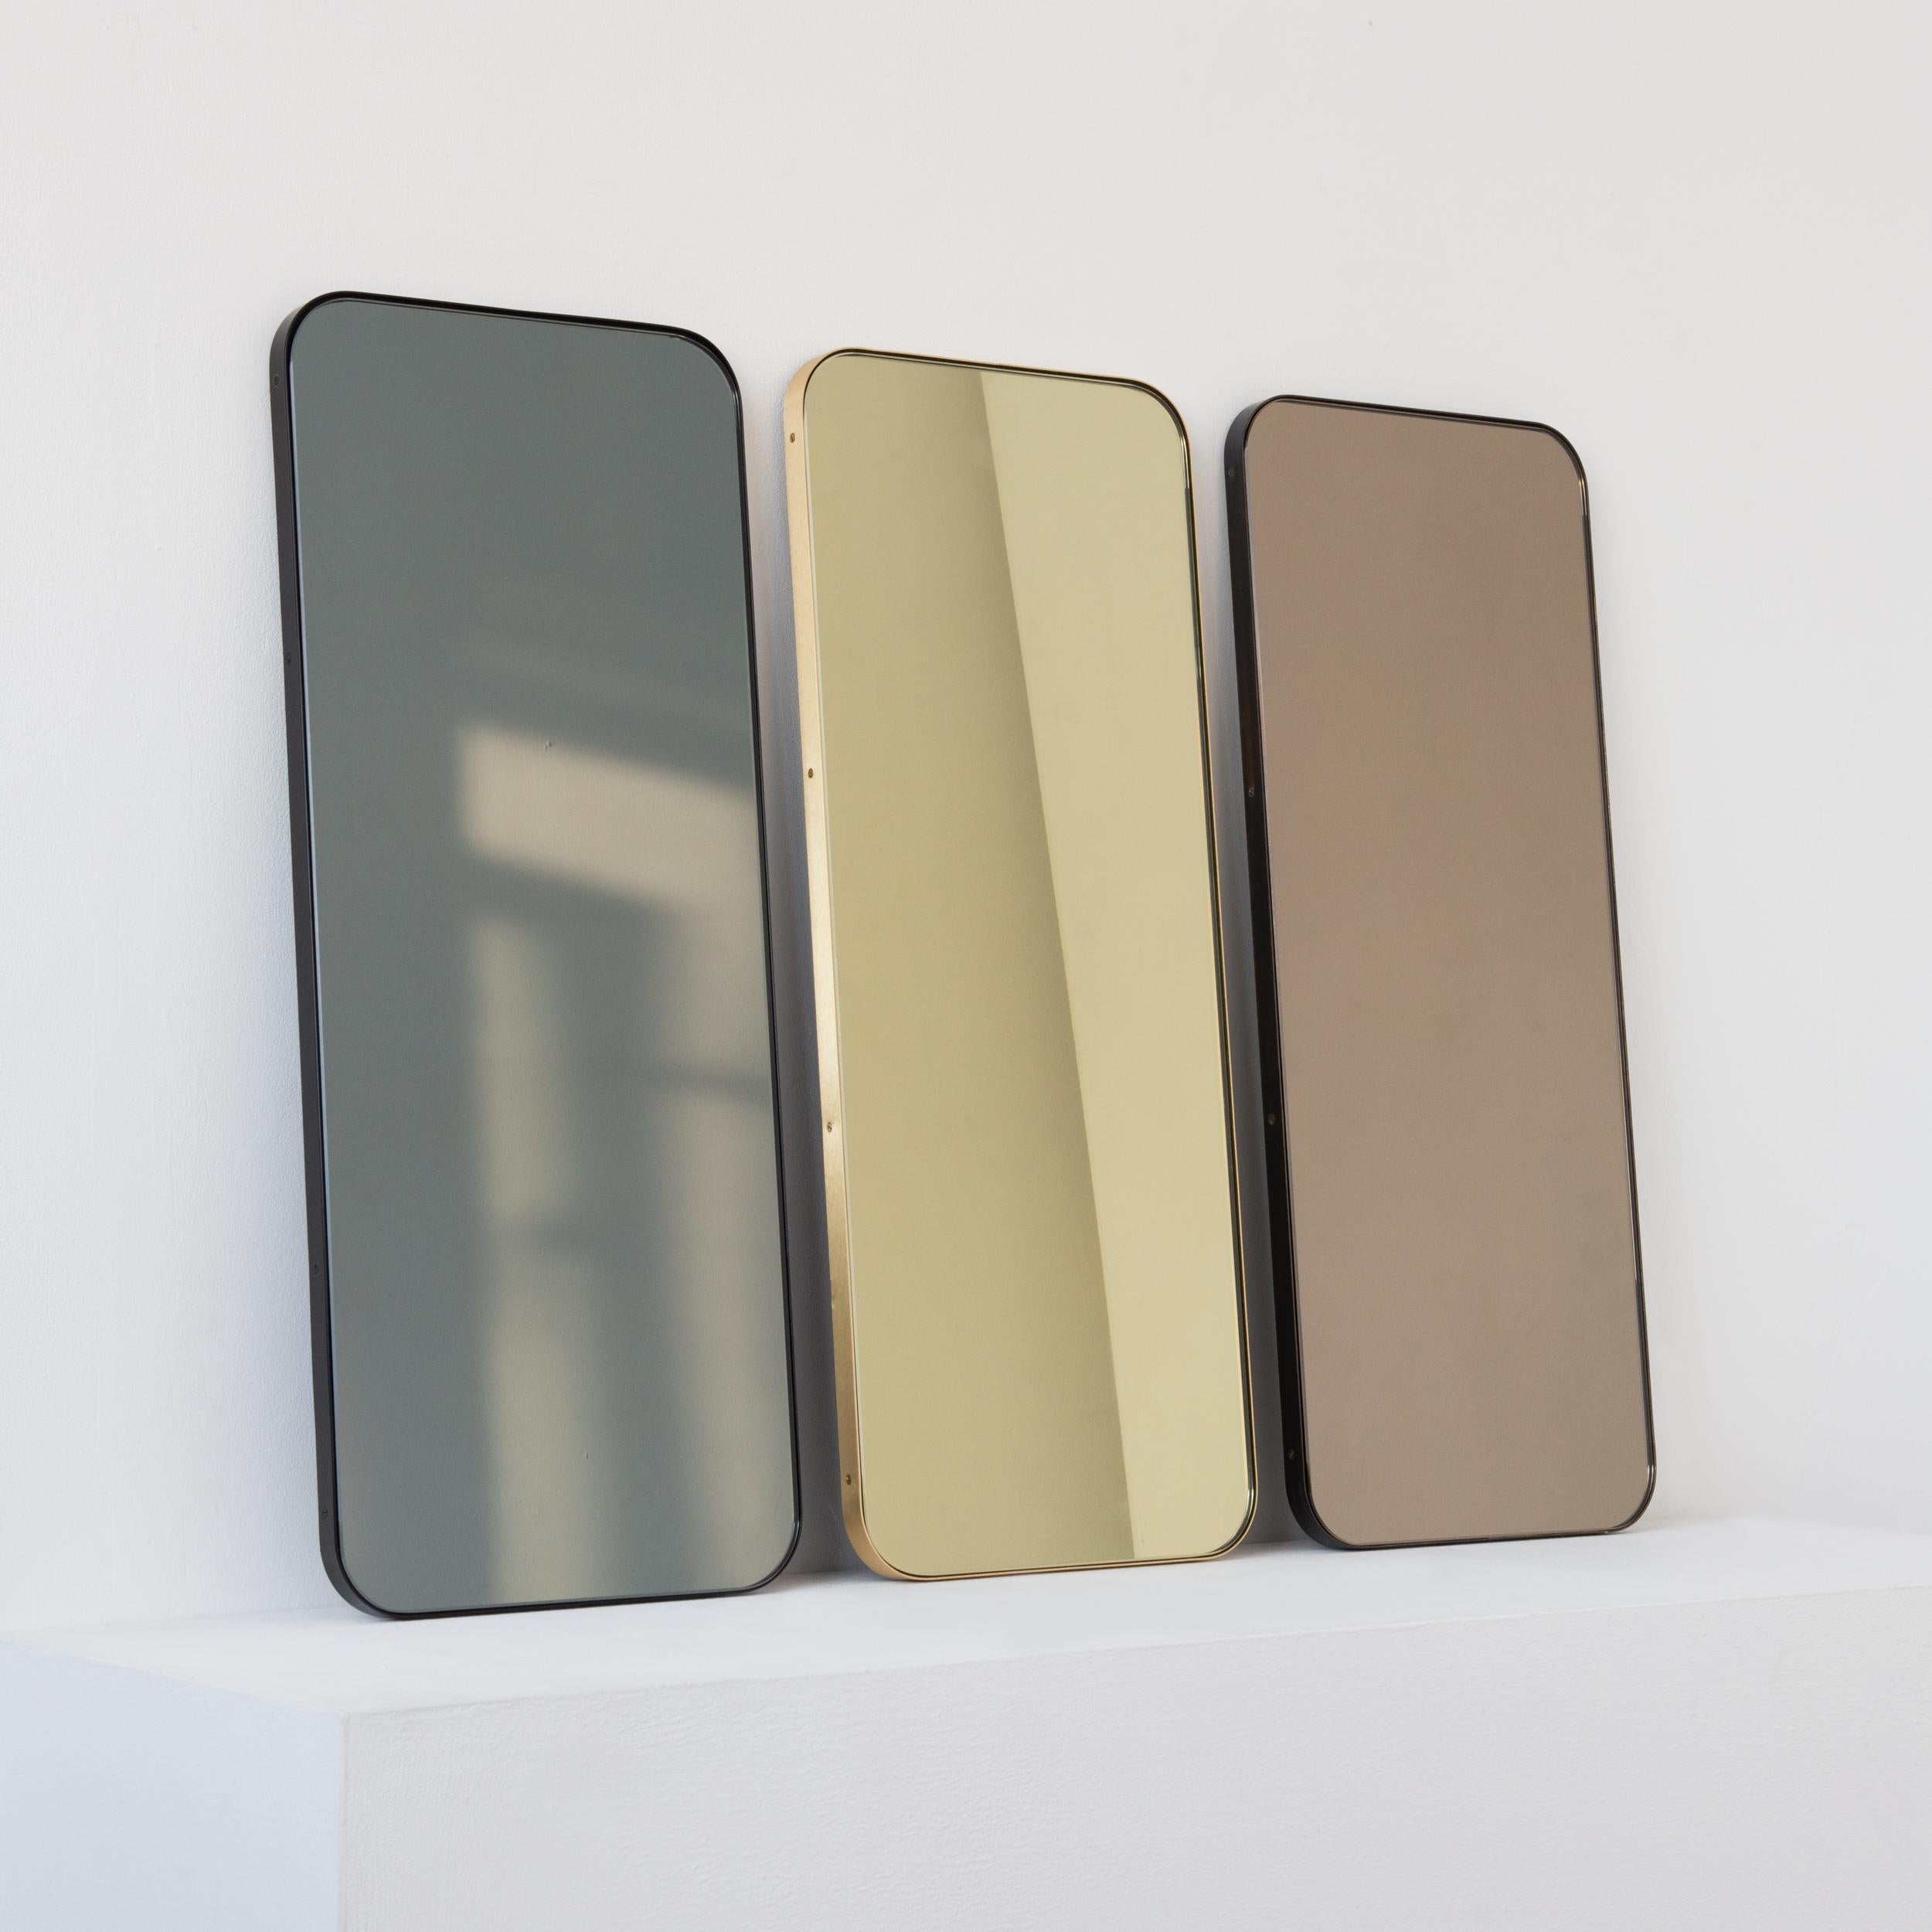 Modern black tinted rectangular mirror with a minimalist solid brushed brass frame. Part of the charming Quadris™ collection, designed and handcrafted in London, UK. 

Our mirrors are designed with an integrated French cleat (split batten) system